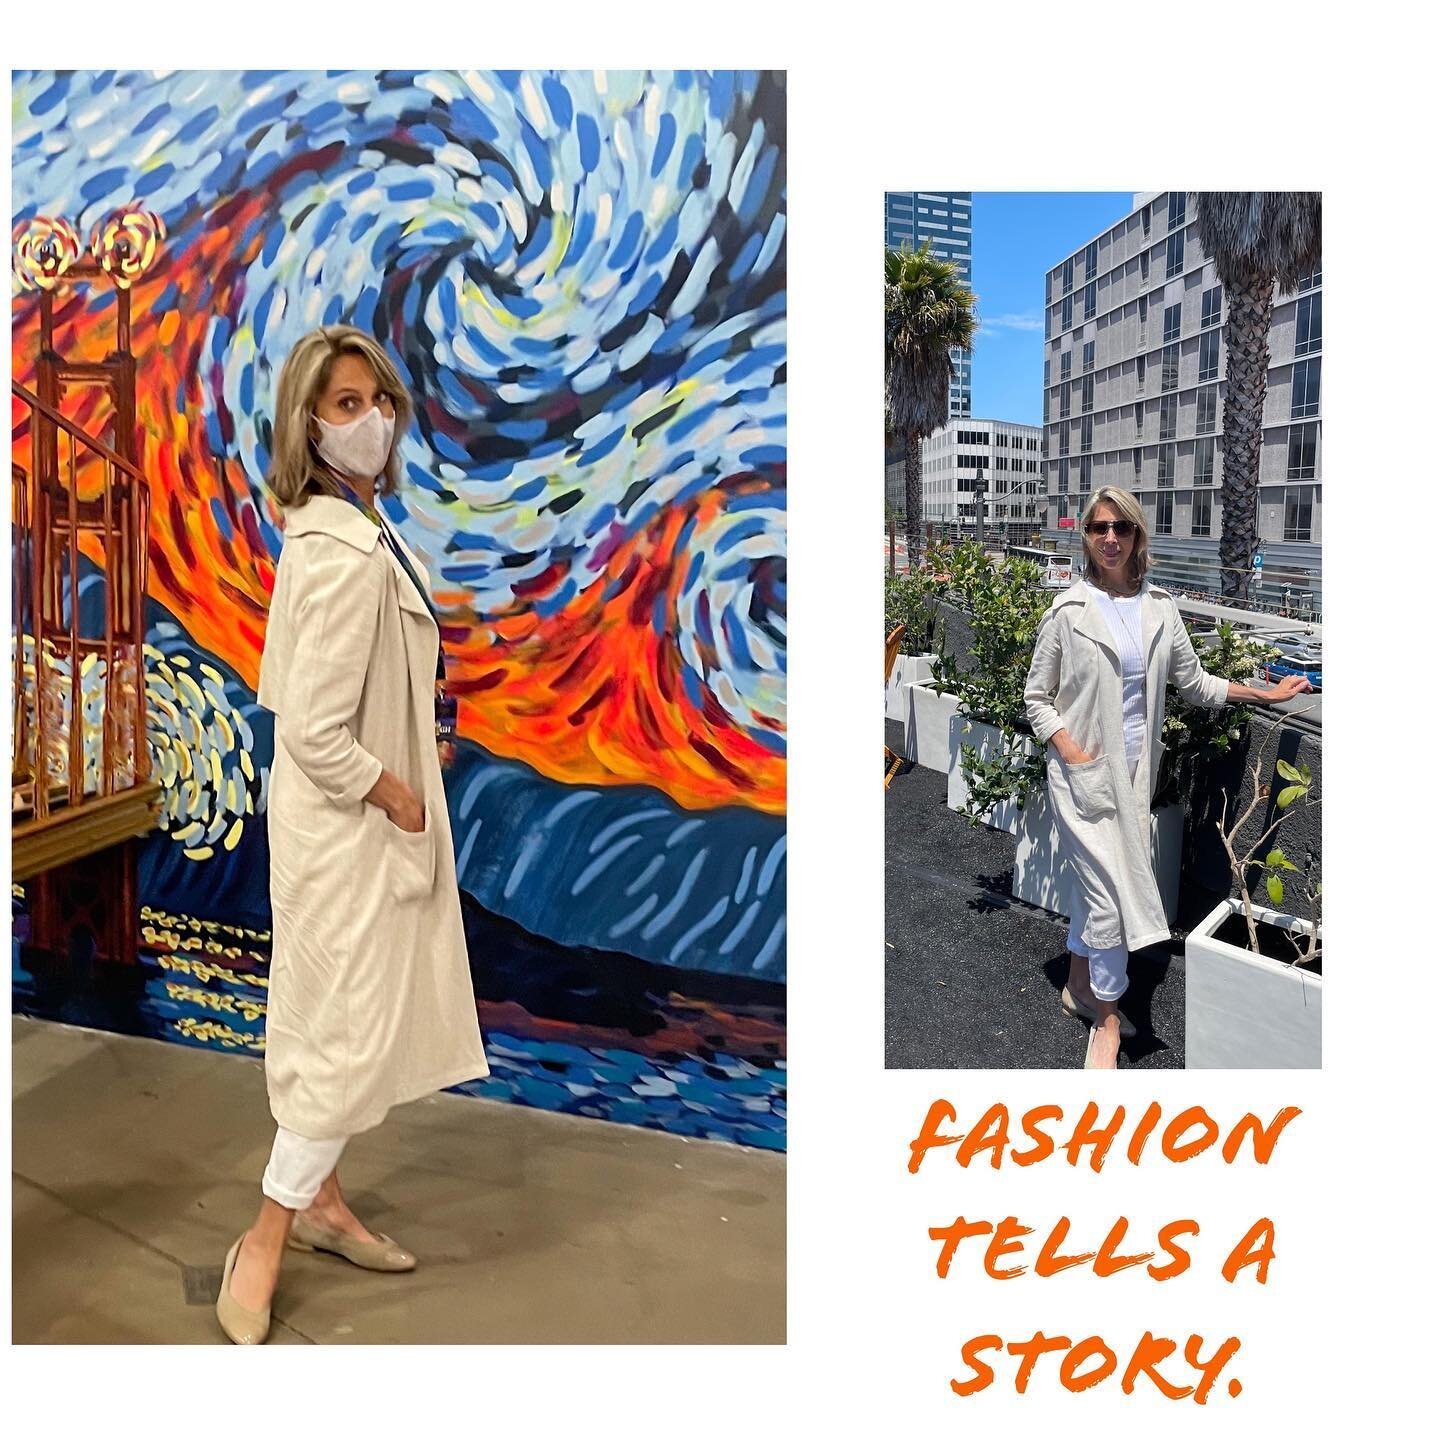 This linen trench kept me perfectly comfortable in San Francisco where we enjoyed a visit to VAN GOGH - The Immersive Experience. There is art in every thread: 

During the shutdown, small retailers were severely restricted. Not needing anything, I&r